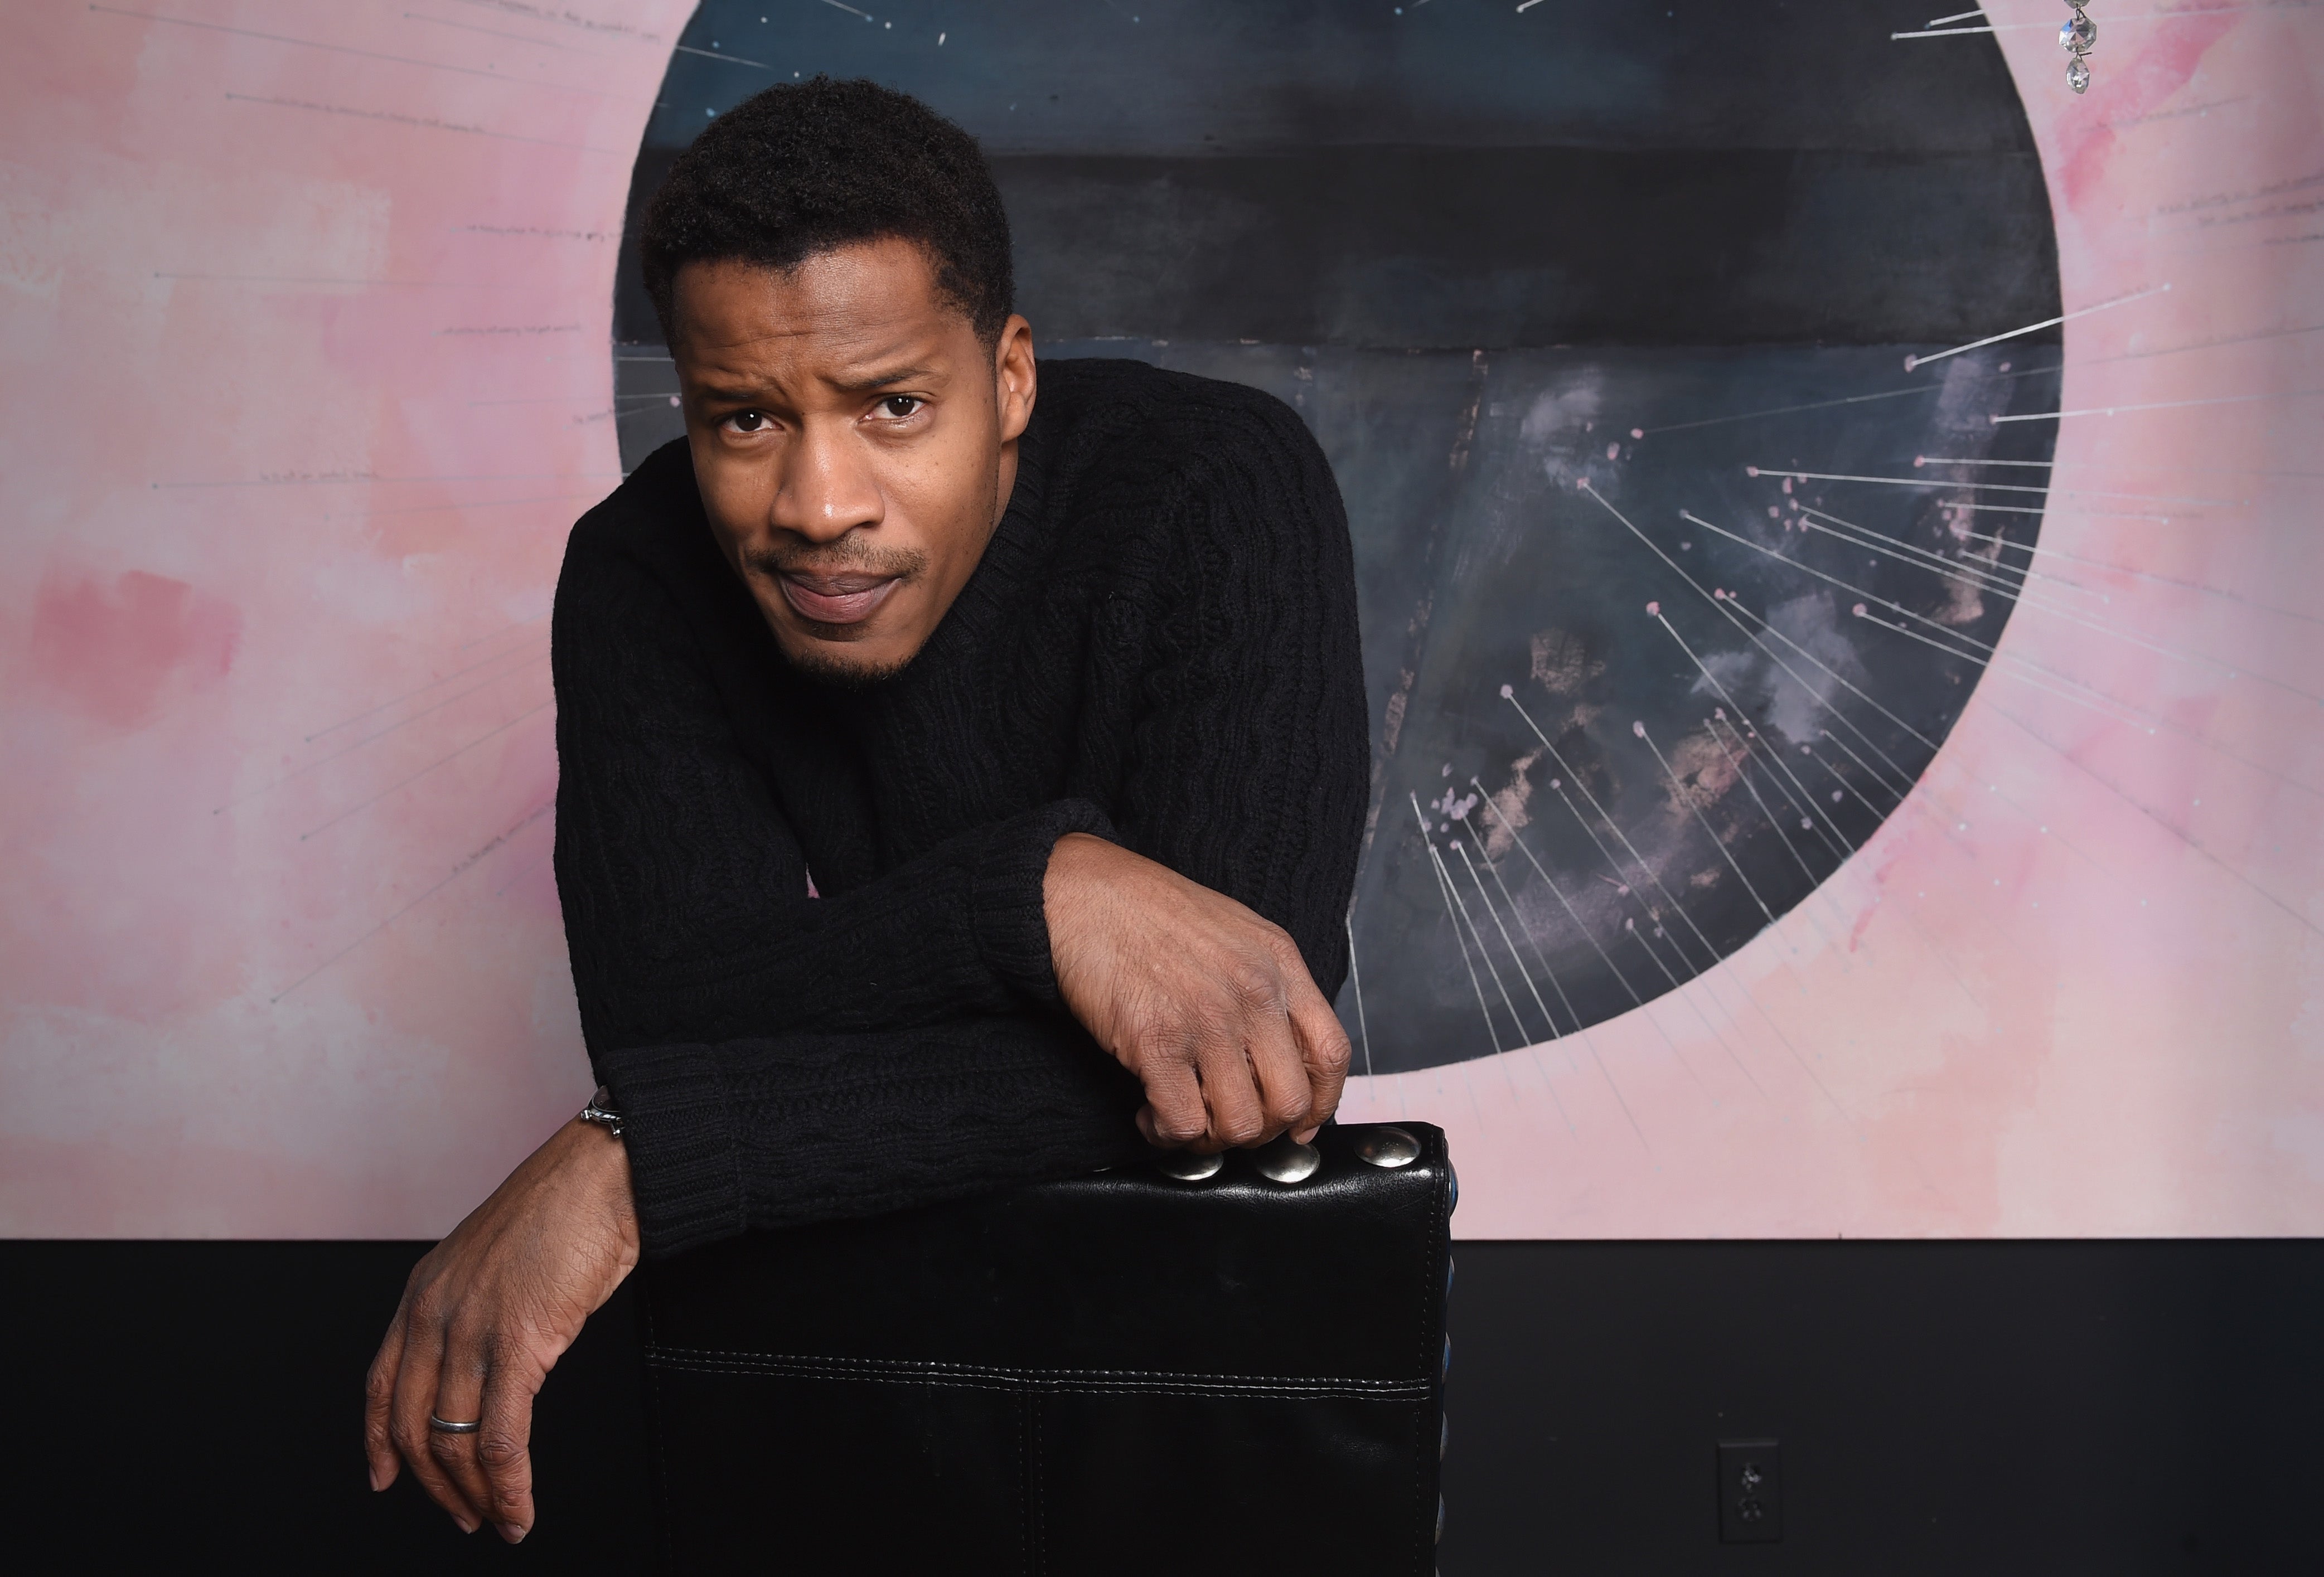 Investigation Reveals New Allegations Of Sexual Misconduct Against Nate Parker